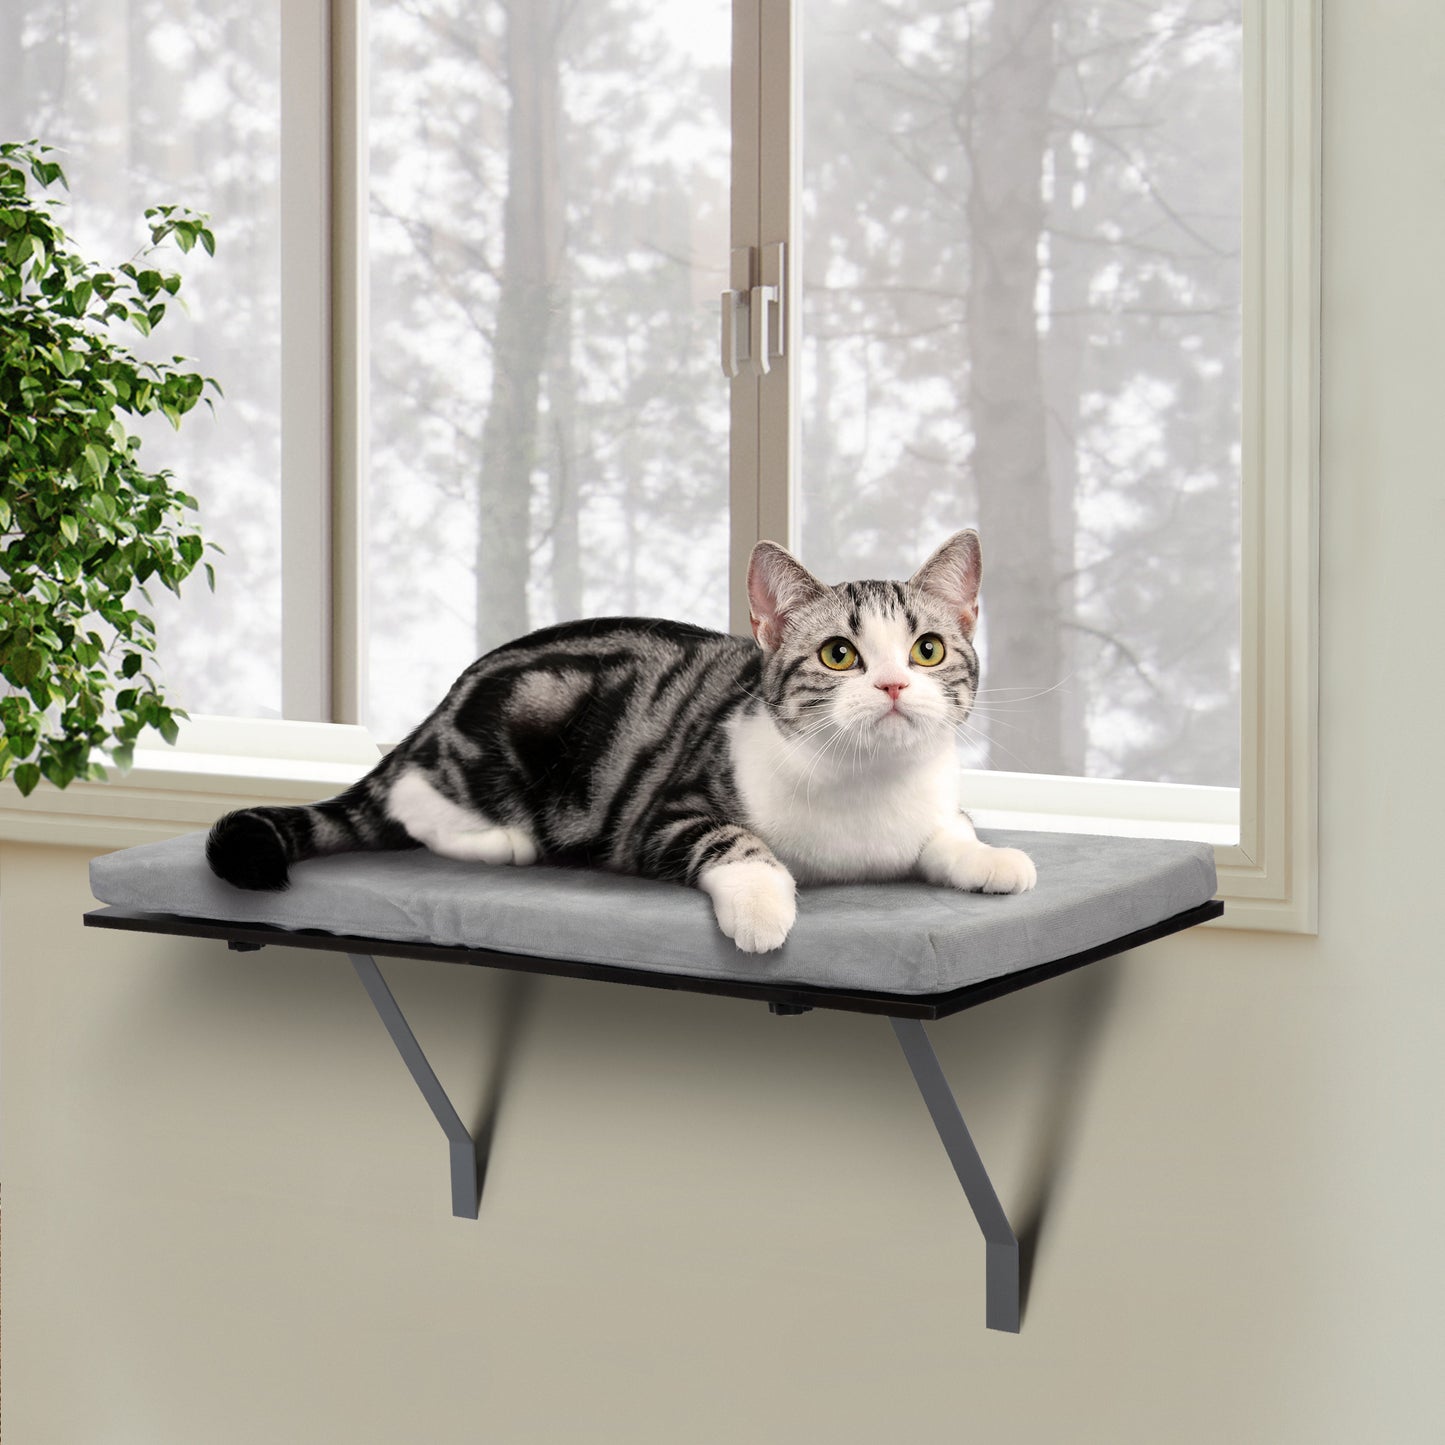 Cat Perch Window Mounted Shelf Bed with Velvet Cushion for Rest, Black Gray